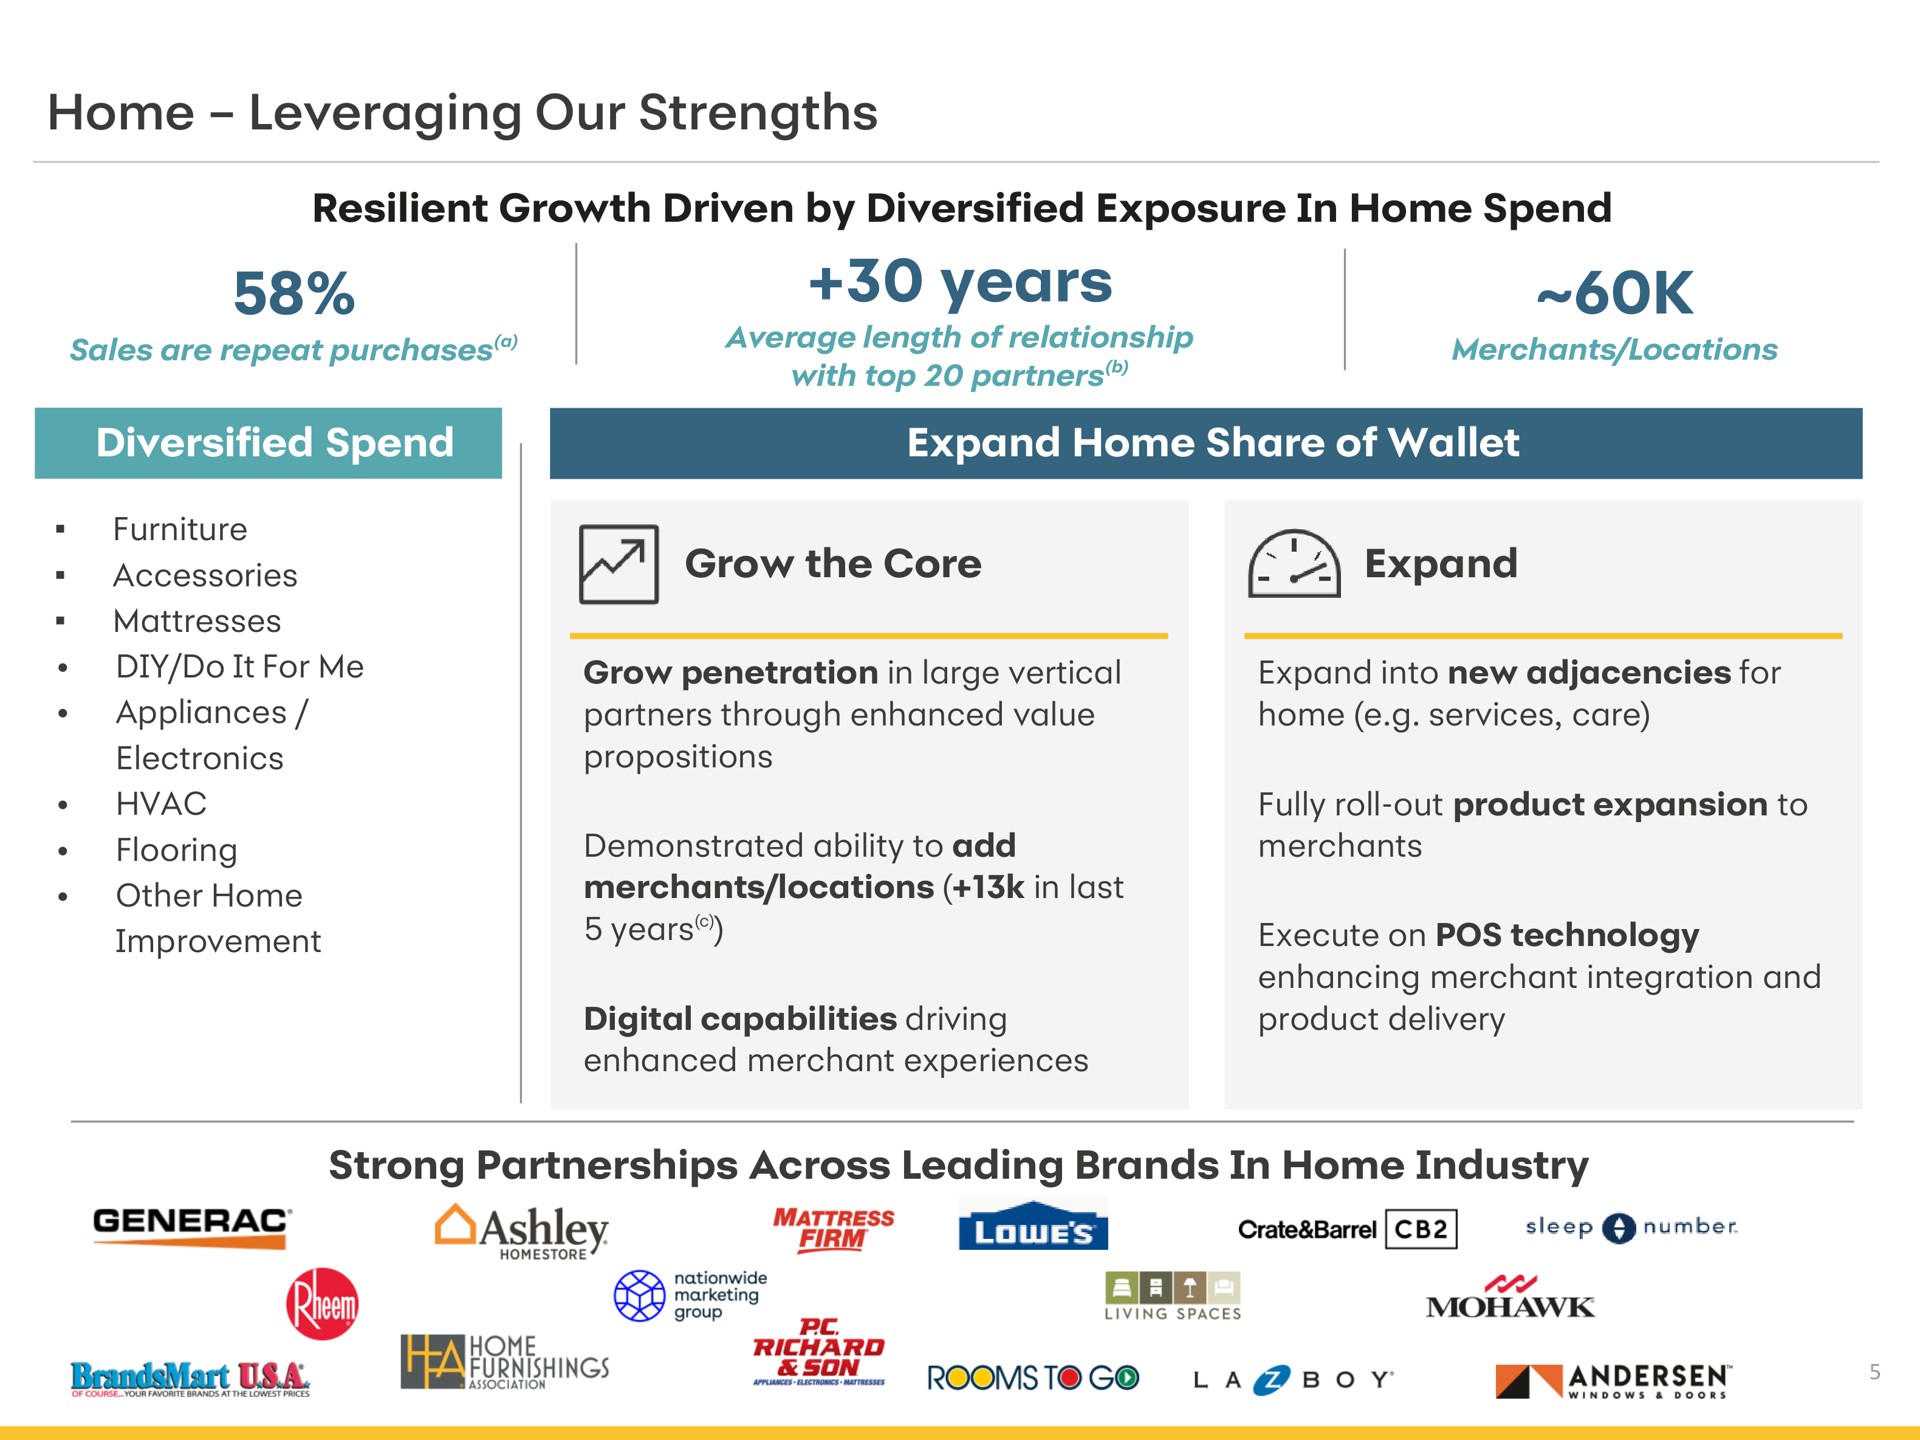 home leveraging our strengths resilient growth driven by diversified exposure in home spend years diversified spend expand home share of wallet furniture accessories mattresses do it for me appliances electronics flooring other home improvement grow the core expand grow penetration in large vertical partners through enhanced value propositions demonstrated ability to add merchants locations in last years digital capabilities driving enhanced merchant experiences expand into new adjacencies for home services care fully roll out product expansion to merchants execute on pos technology enhancing merchant integration and product delivery strong partnerships across leading brands in home industry sales are repeat purchases average length with top boy | Synchrony Financial